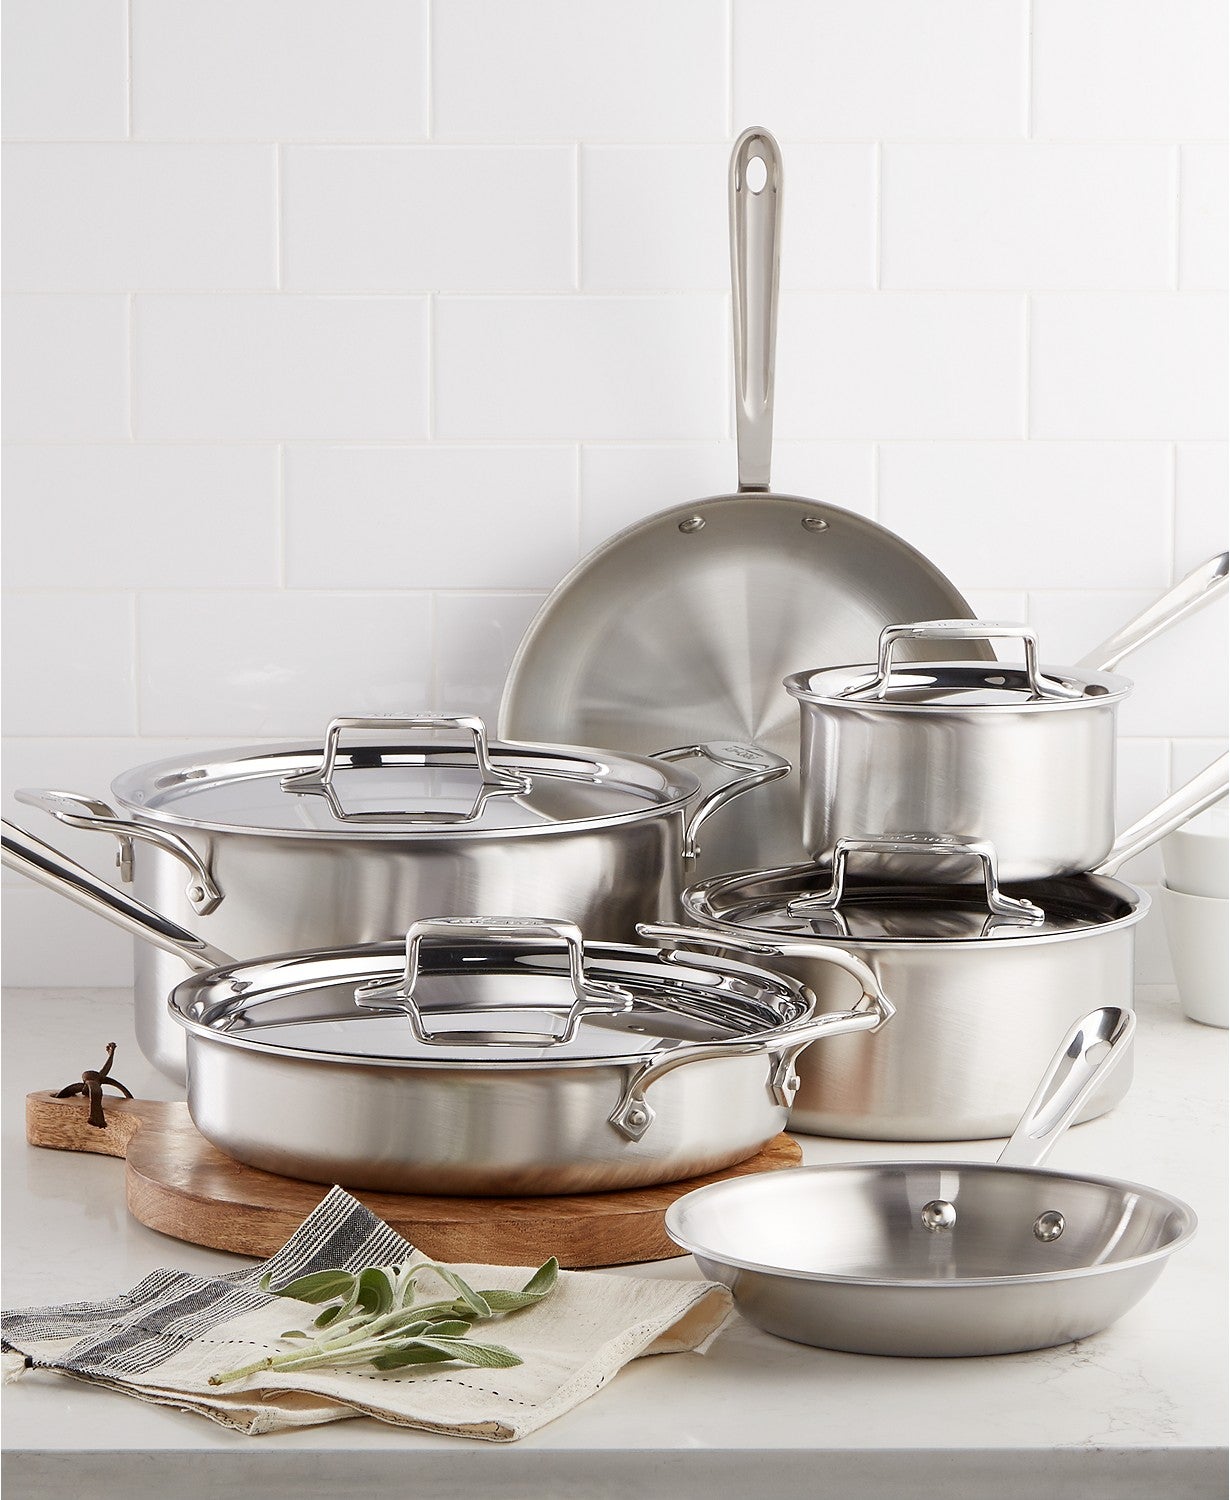 D5 Brushed Stainless Steel 10-Pc. Cookware Set